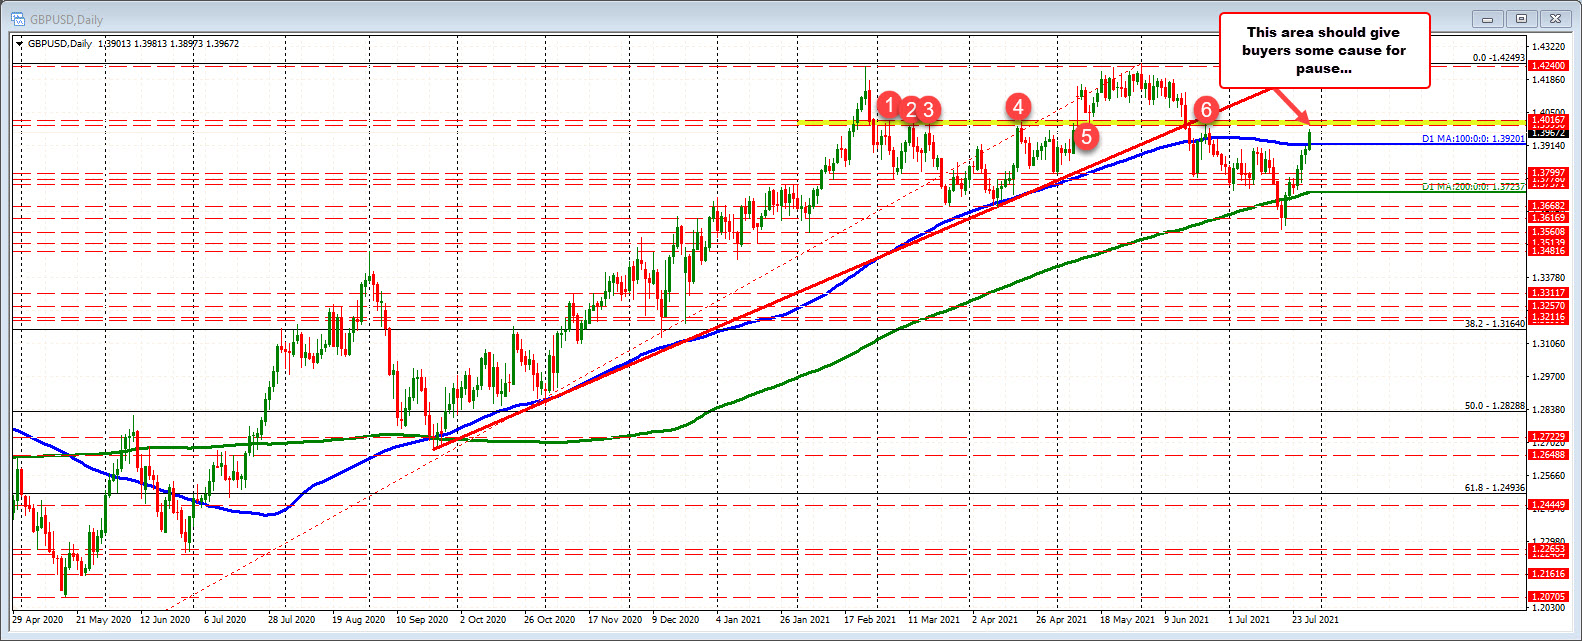 GBPUSD on the daily chart is more bullish above the 100 hour MA